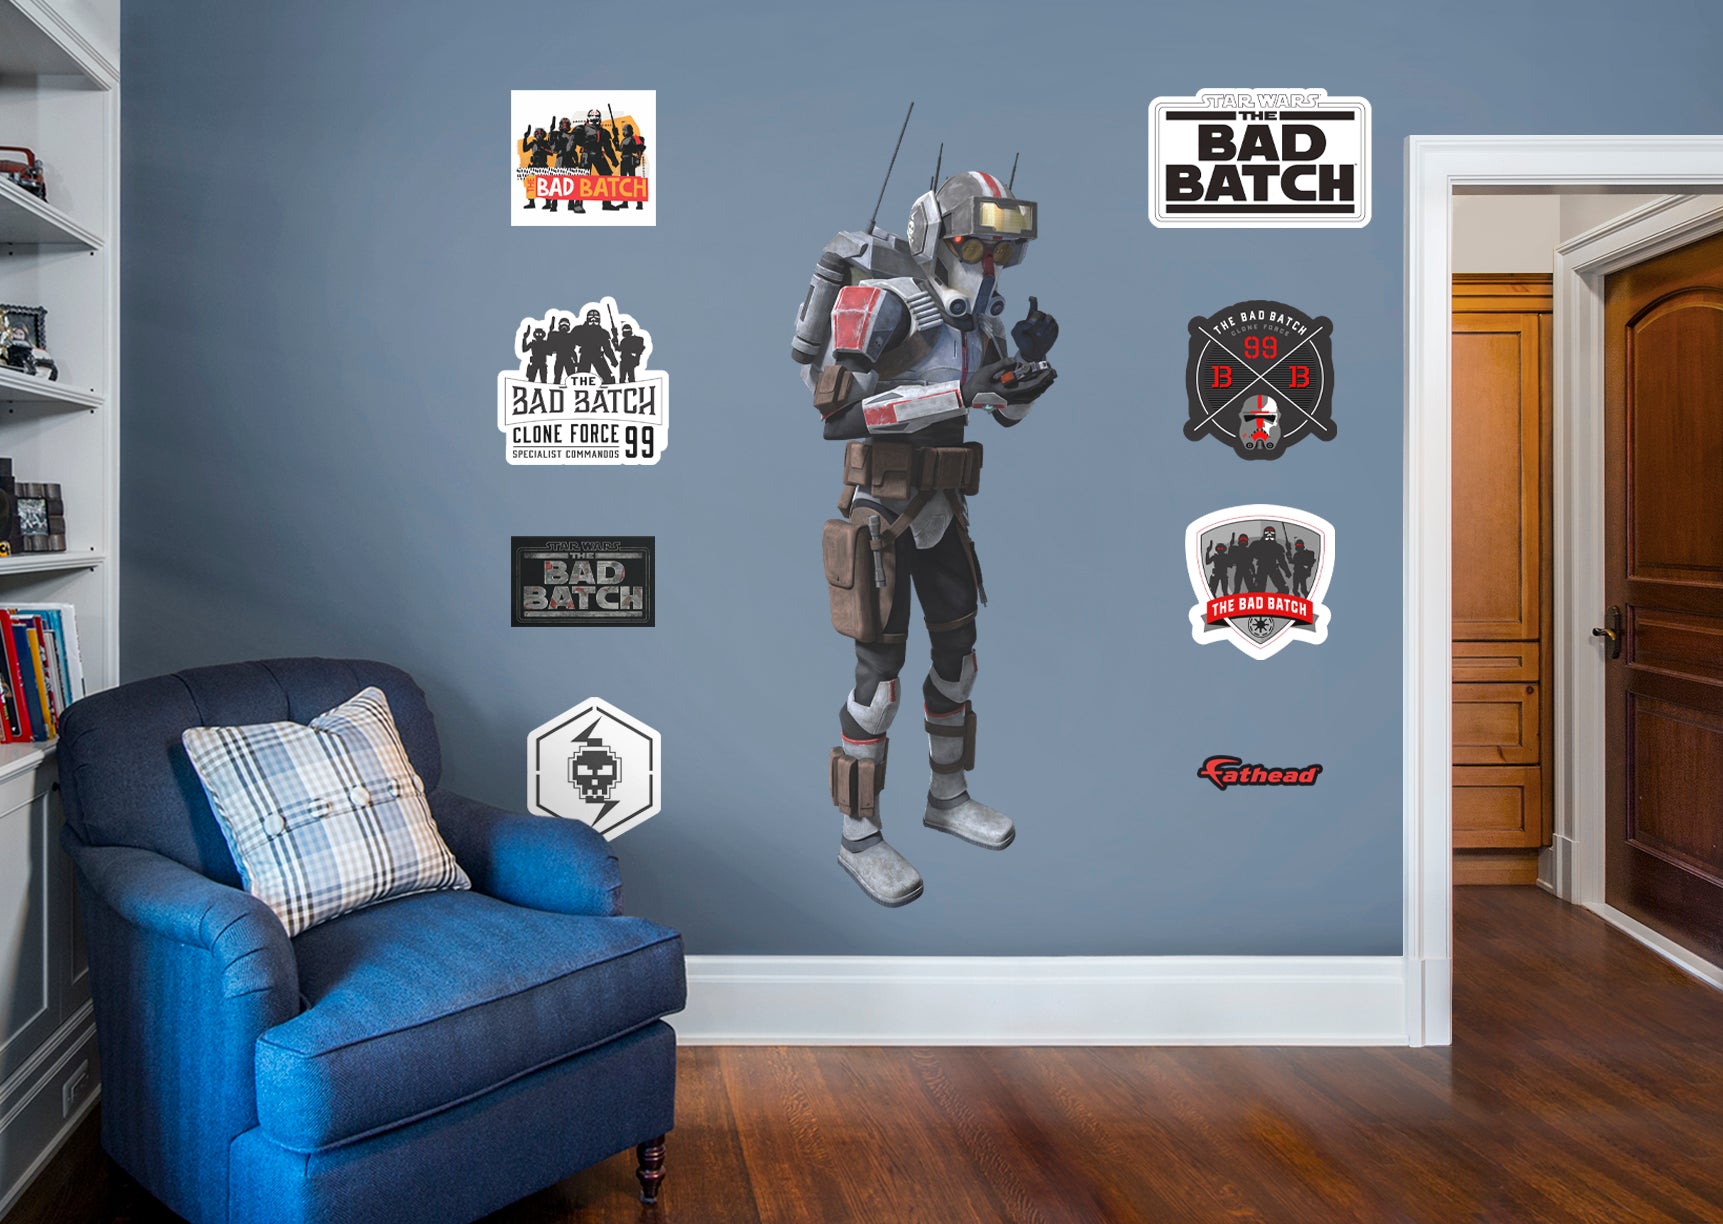 Bad Batch Tech - Officially Licensed Star Wars Removable Wall Decal Life-Size Character + 8 Decals by Fathead | Vinyl